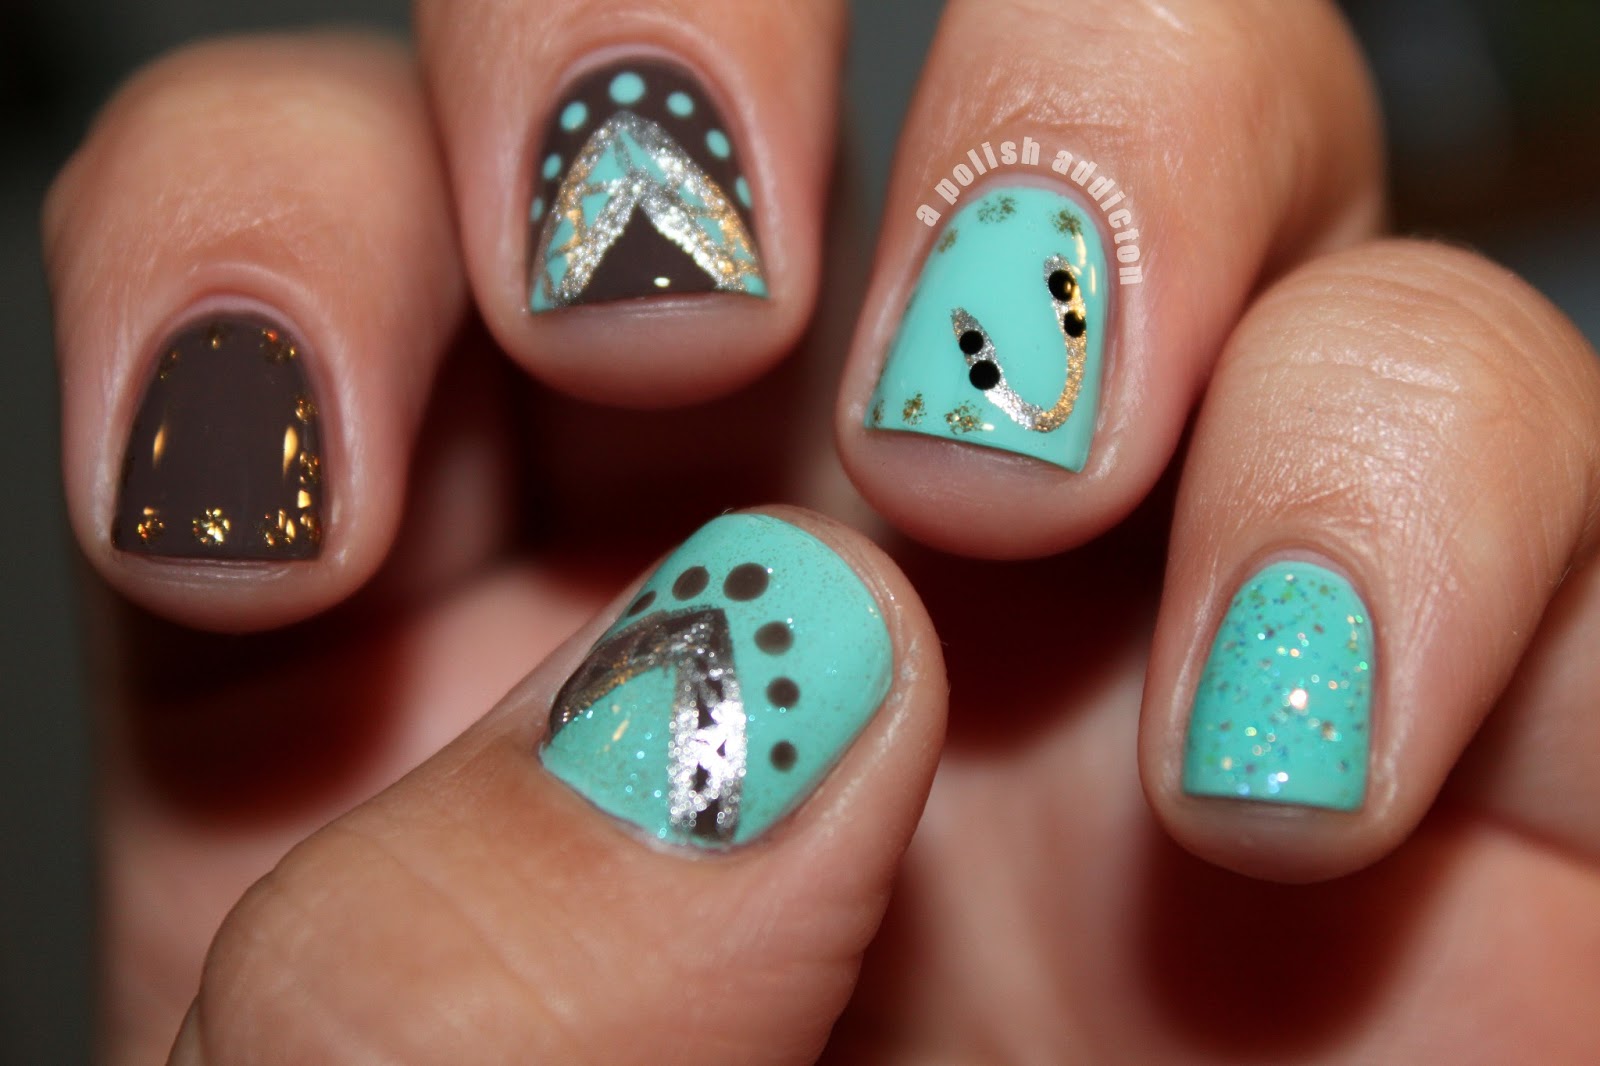 10. Western Themed Nail Art - wide 7